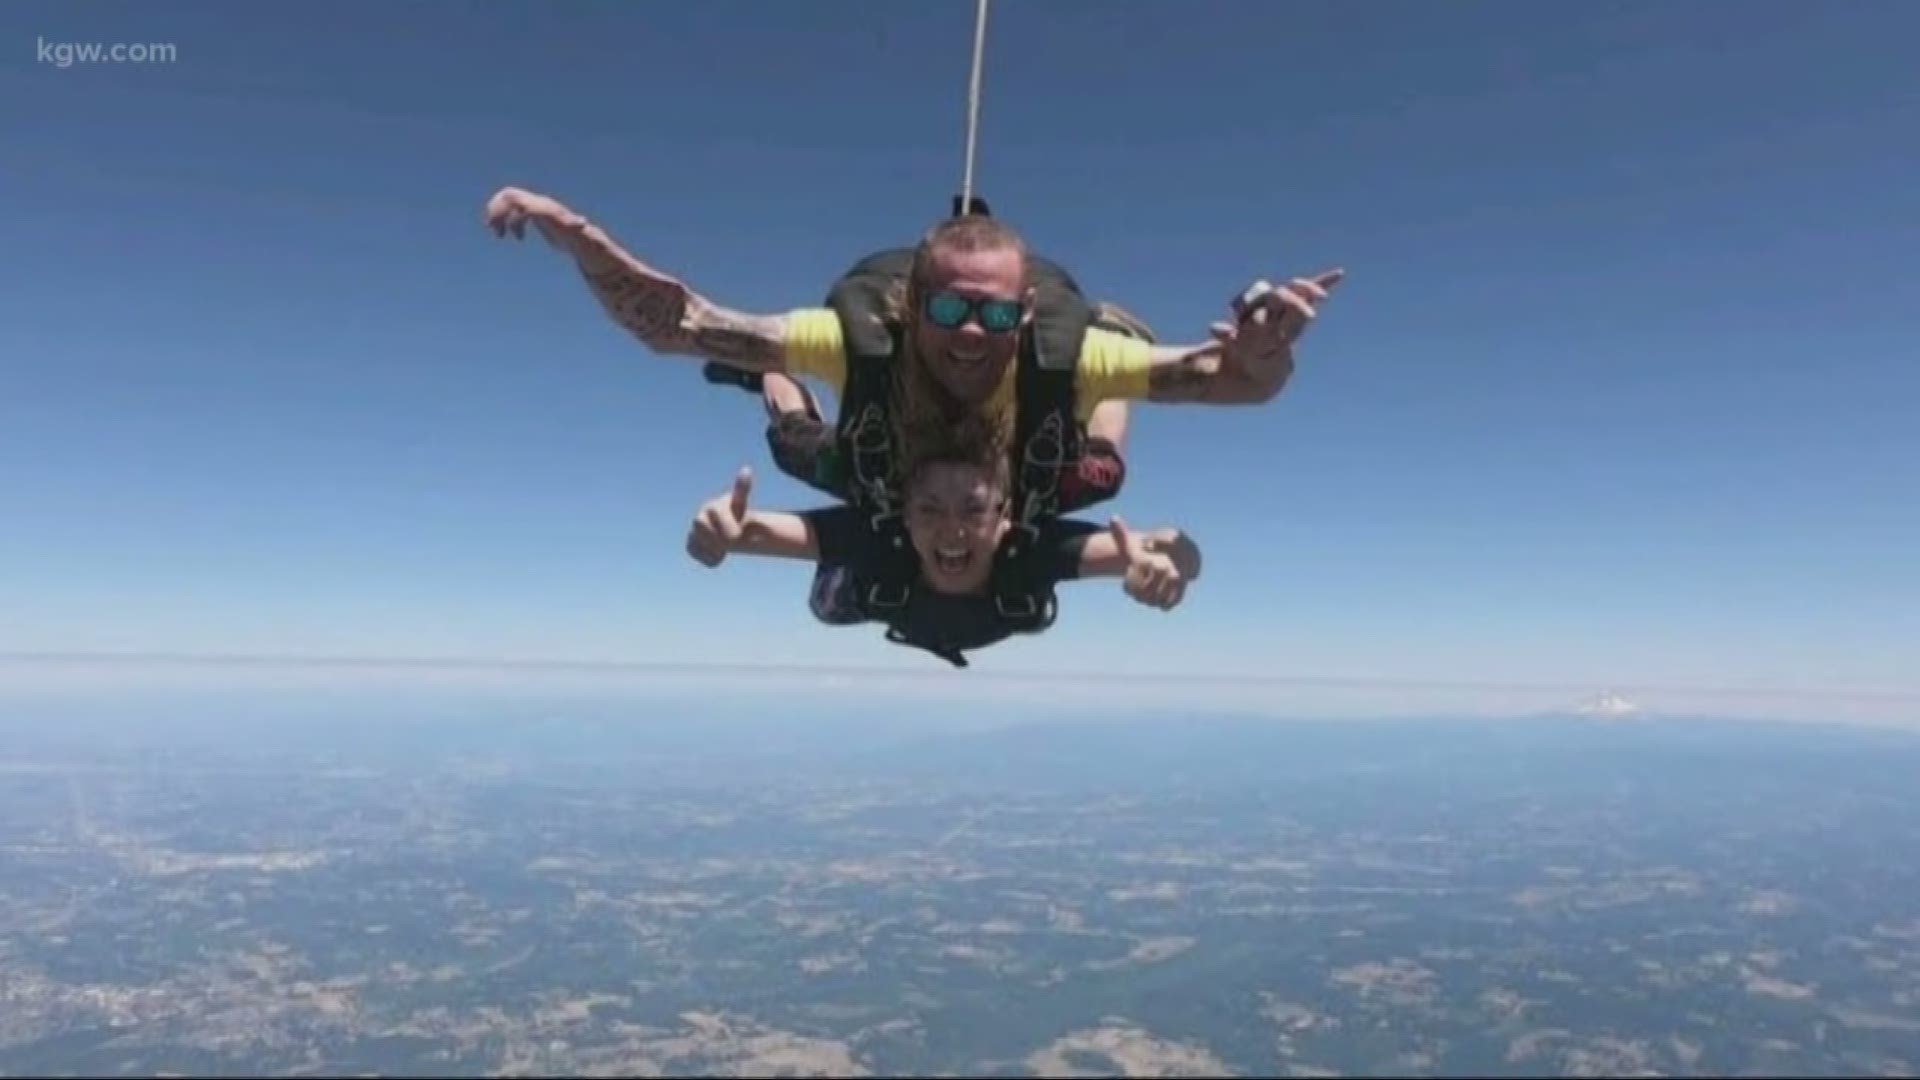 Cassidy celebrated her 30th birthday with a surprise skydiving adventure. Ask her your questions about leaping out of a plane.
#TonightwithCassidy